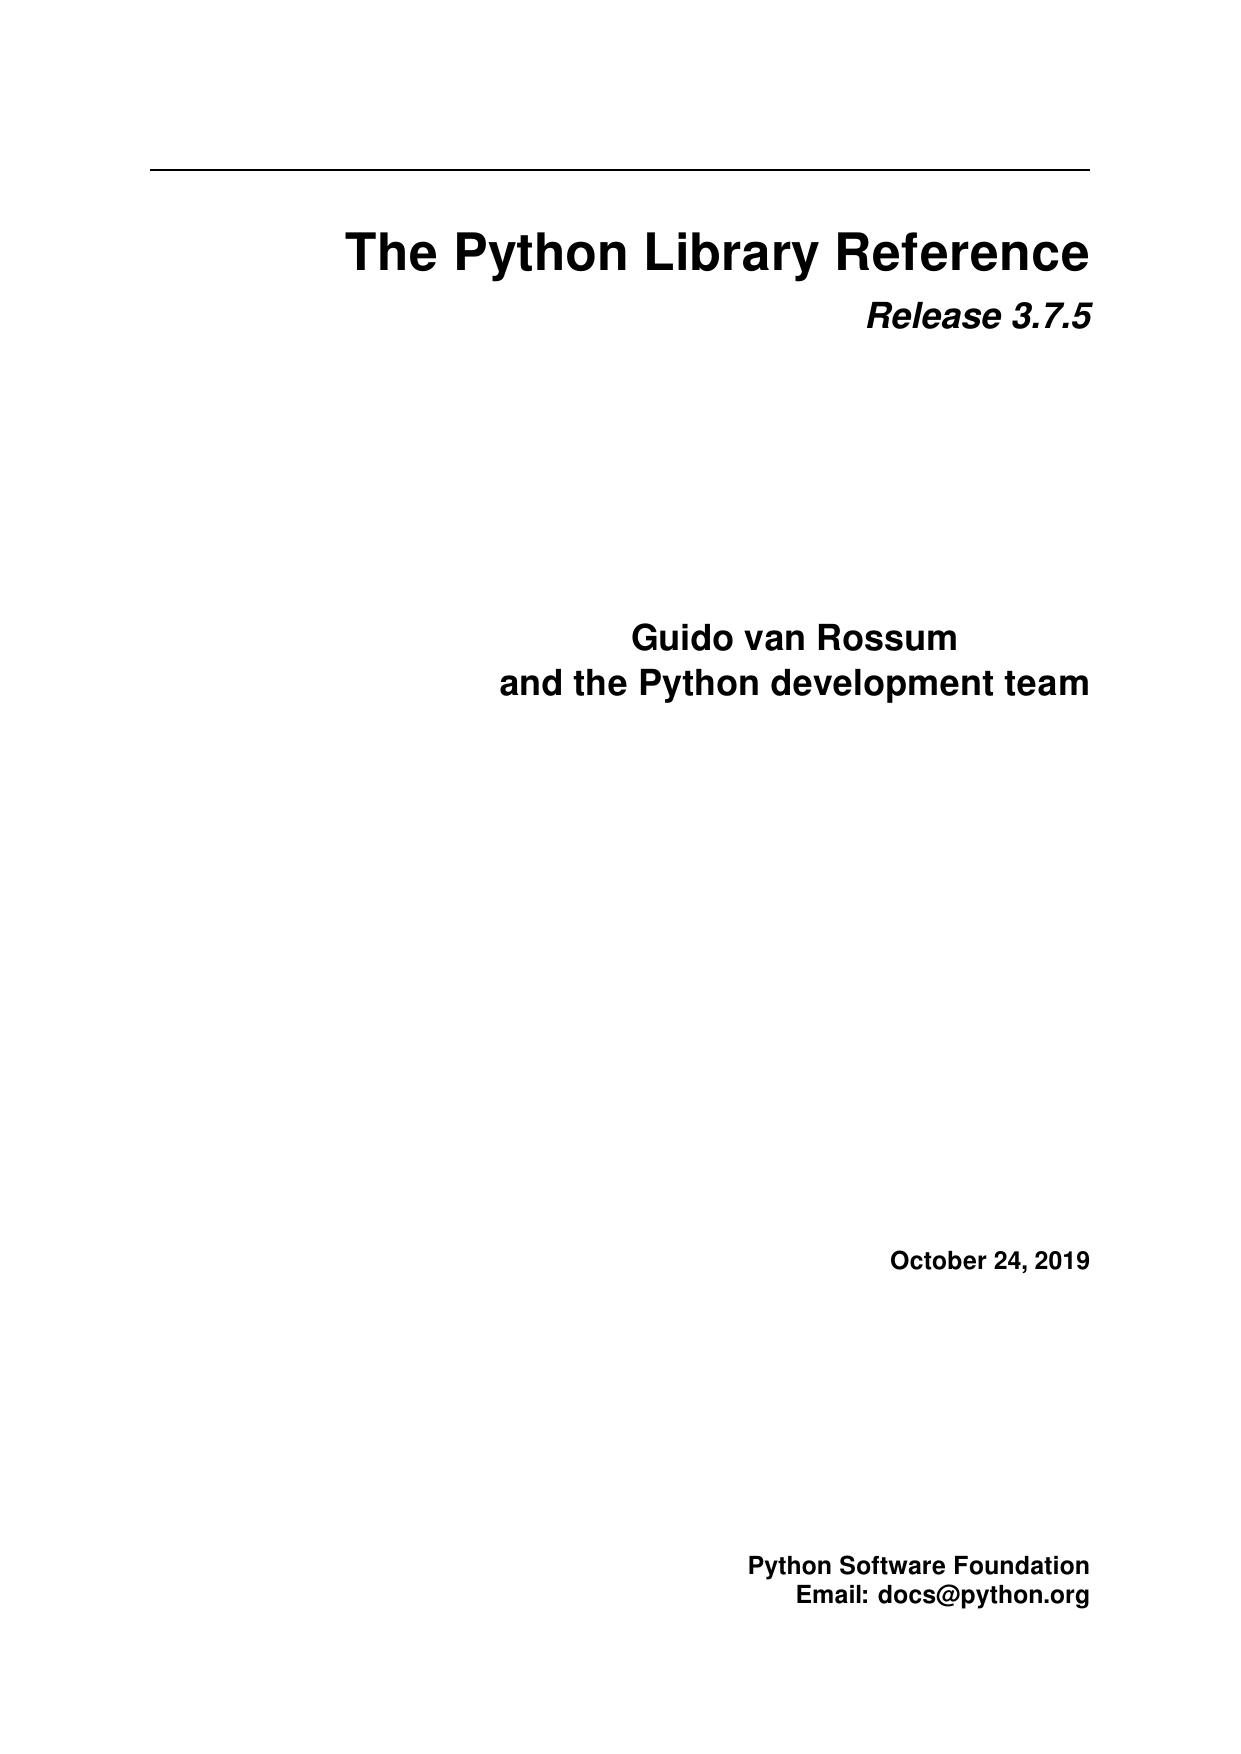 The Python Library Reference by Guido van Rossum & the Python development team